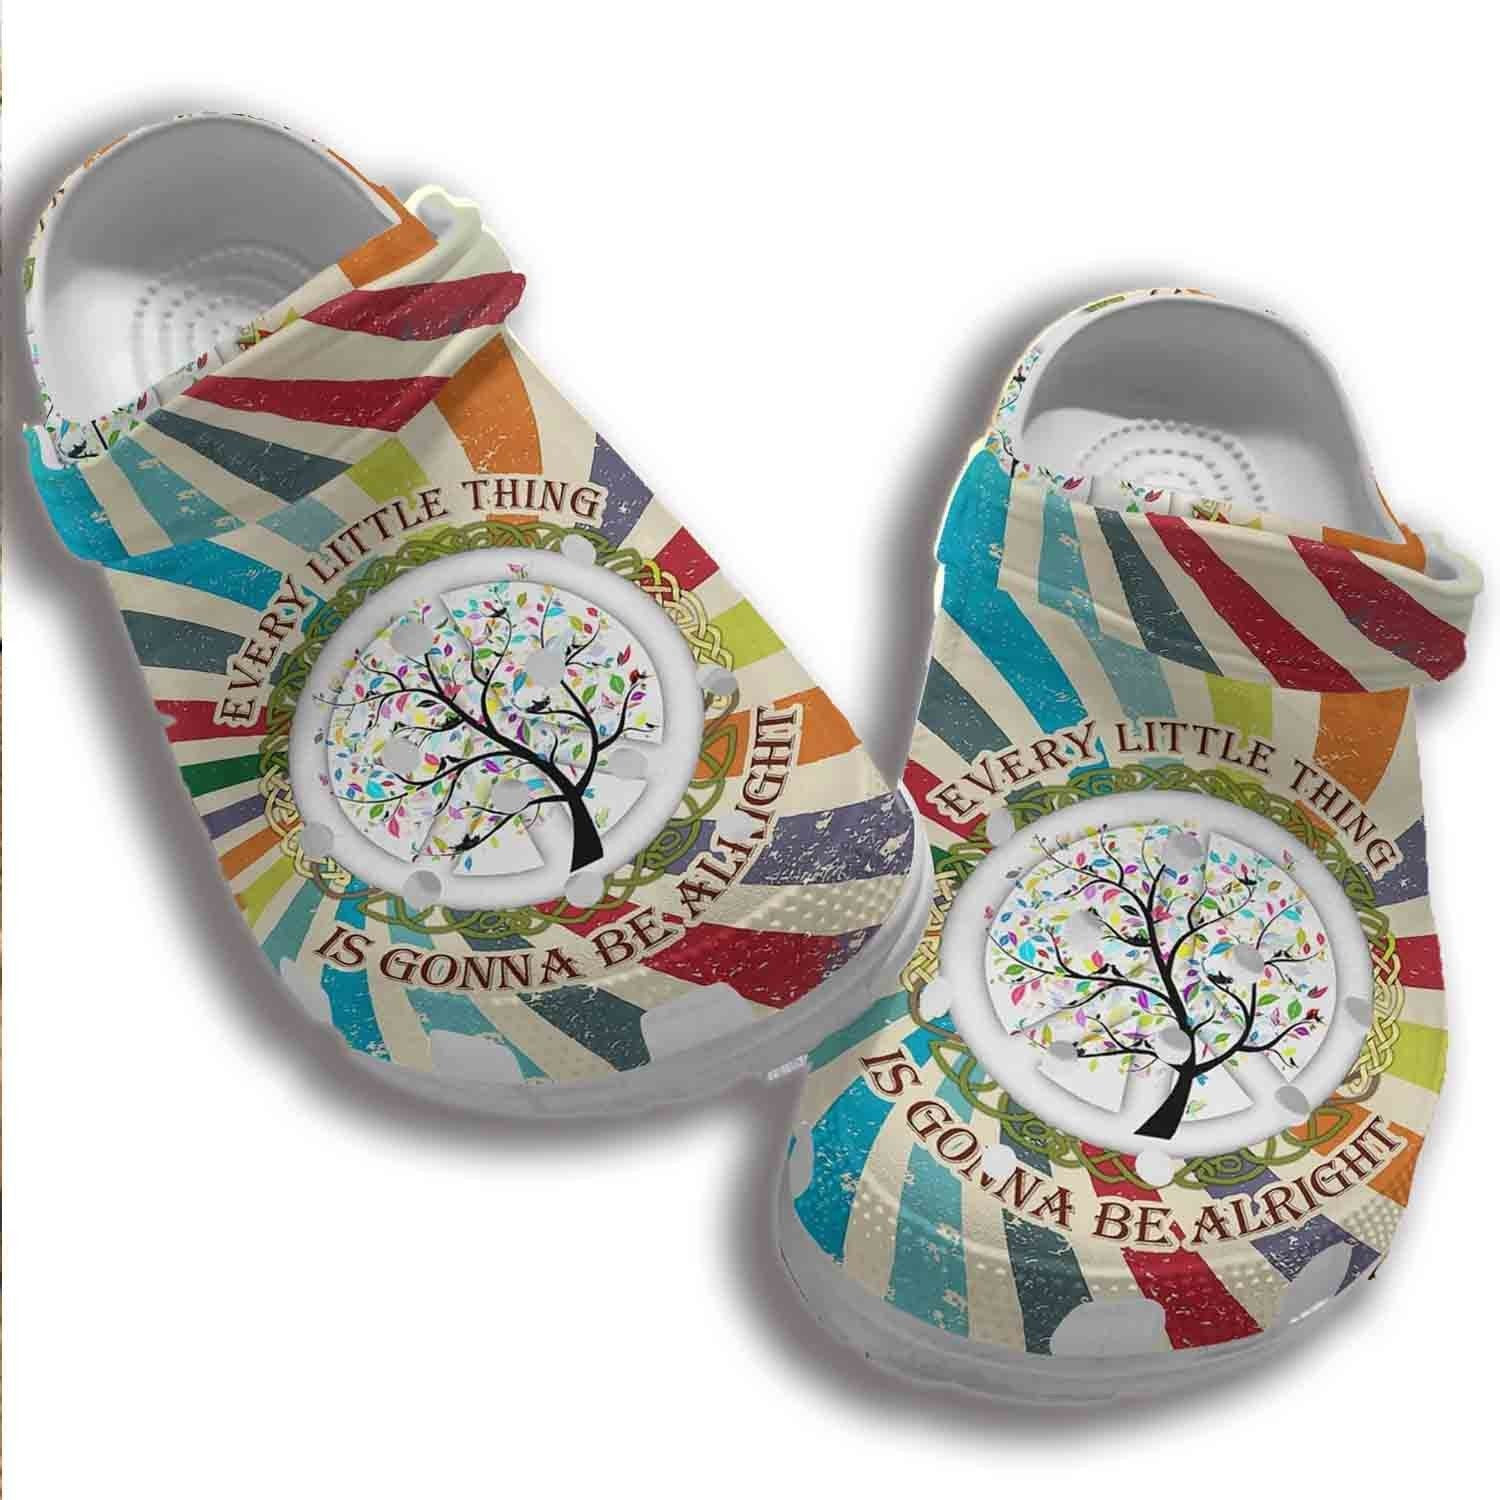 Free Tree Hippie Crocs Shoes Clogs Men Women - Everything Gonna Be Alright Crocs Shoes Clogs